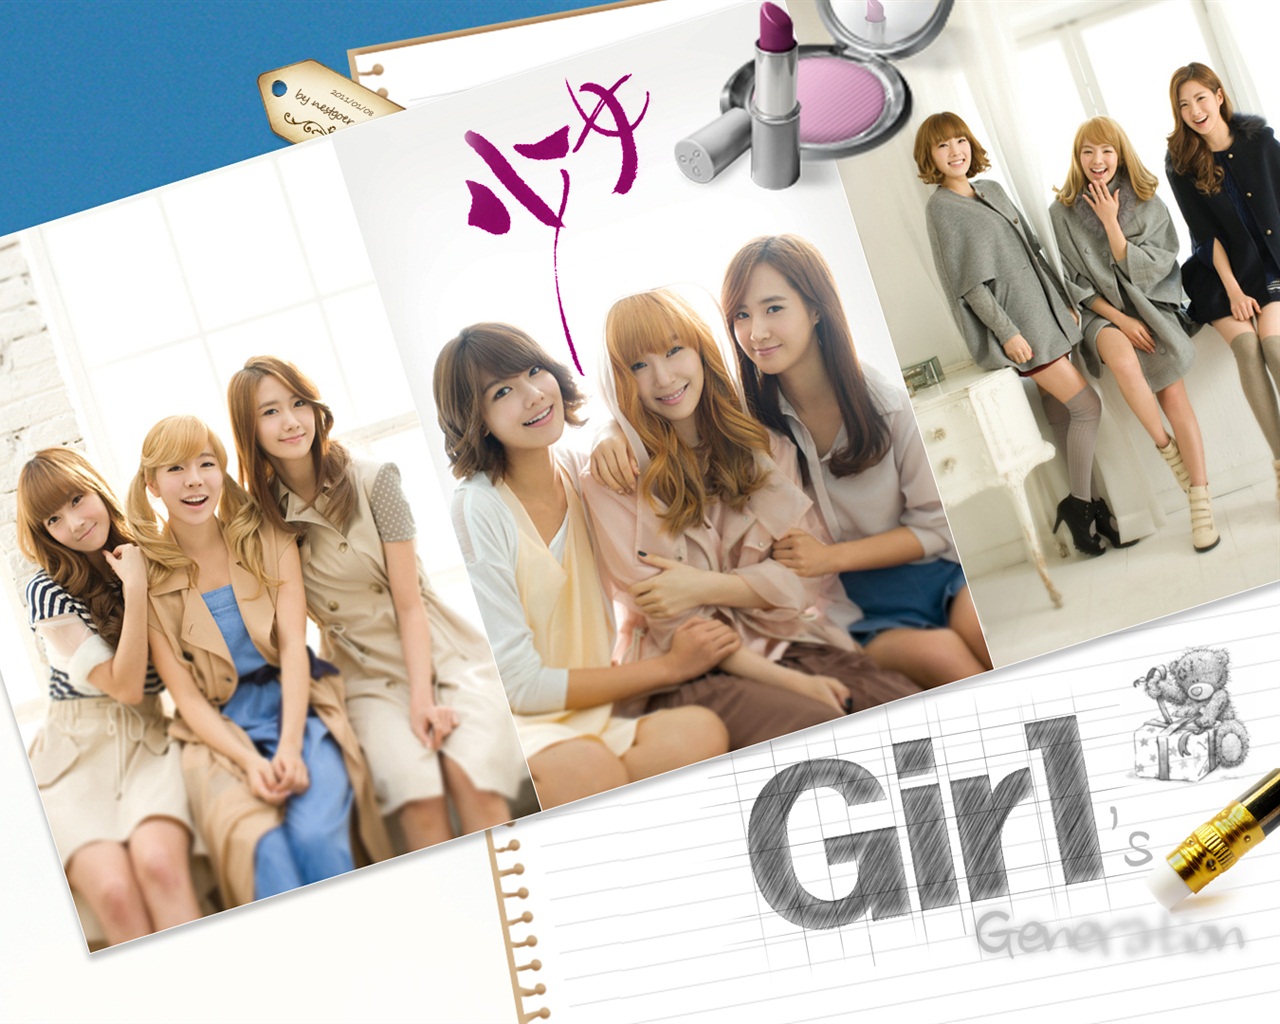 Girls Generation latest HD wallpapers collection #11 - 1280x1024